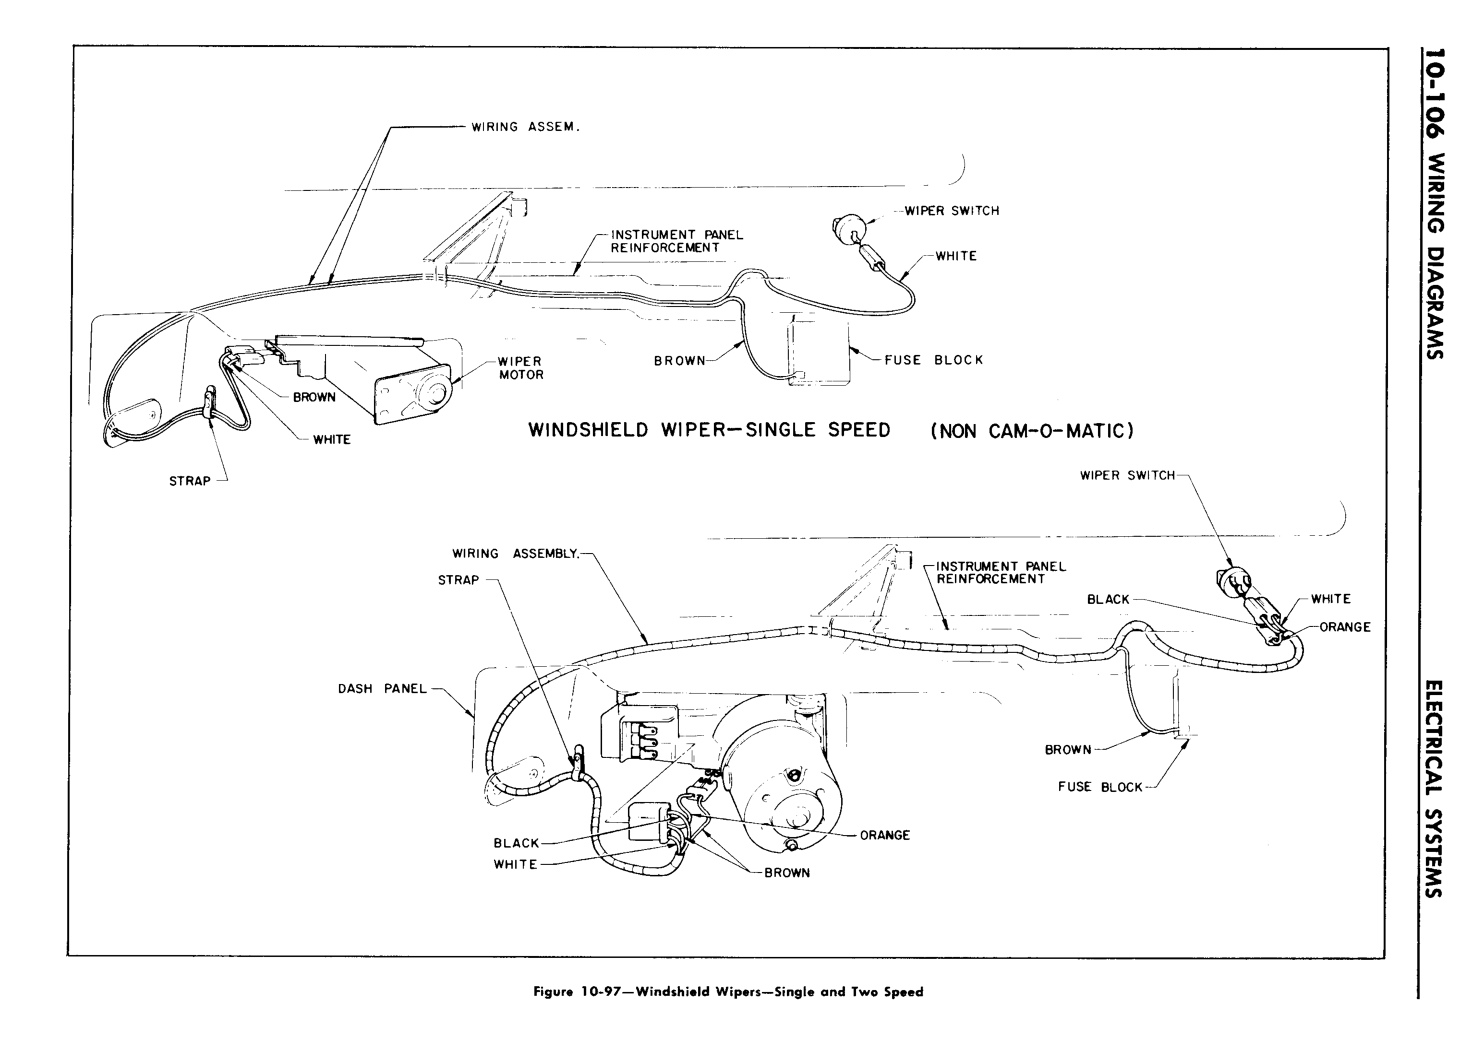 n_11 1960 Buick Shop Manual - Electrical Systems-106-106.jpg